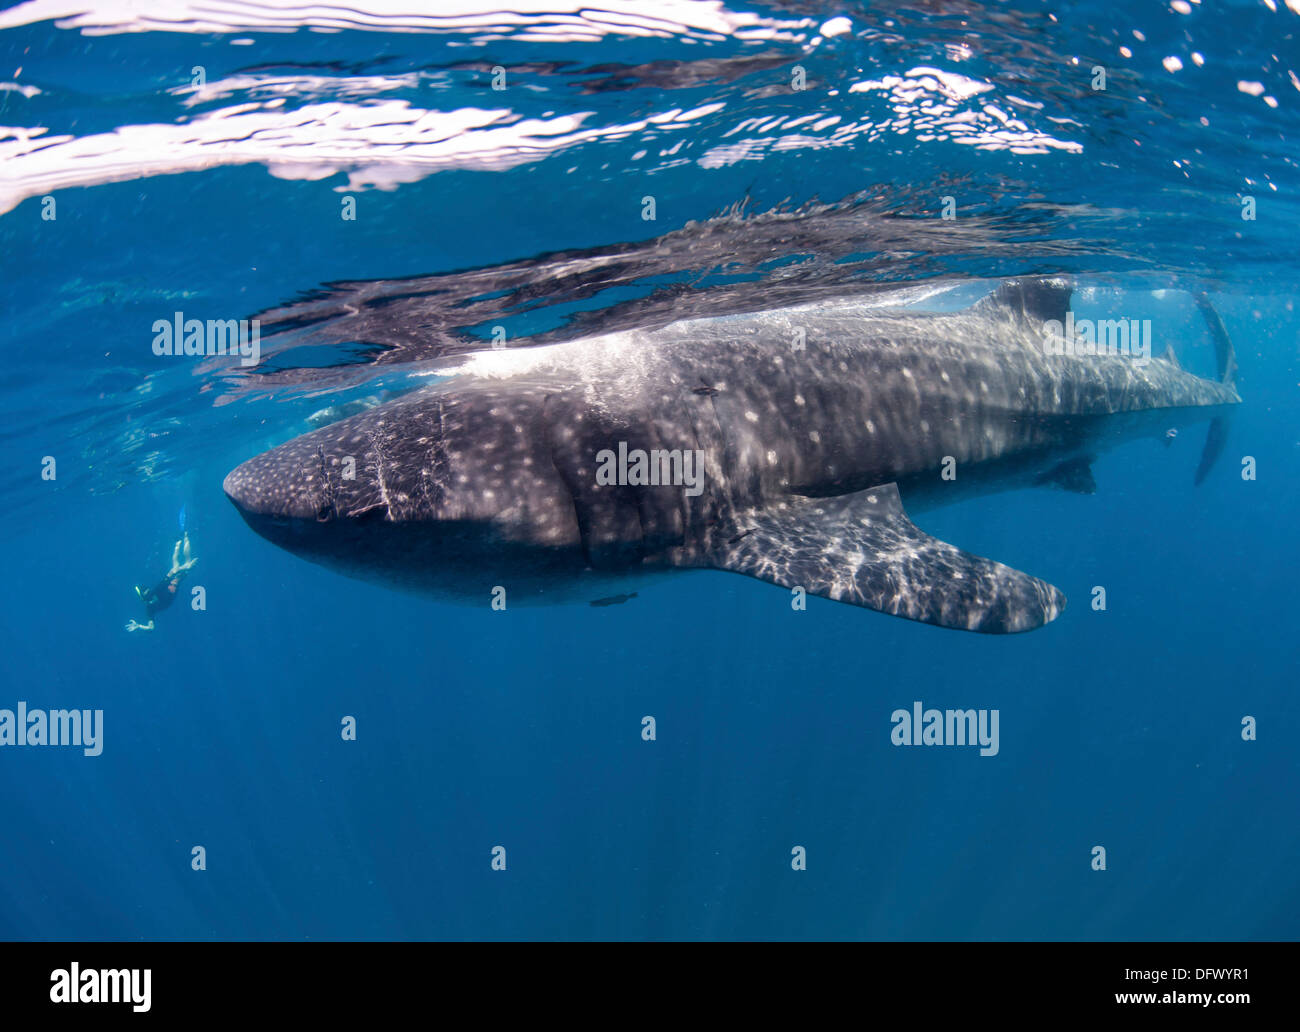 Whale Shark feeding off coast of Isla Mujeres, Mexico, with snorkeler in background. Stock Photo